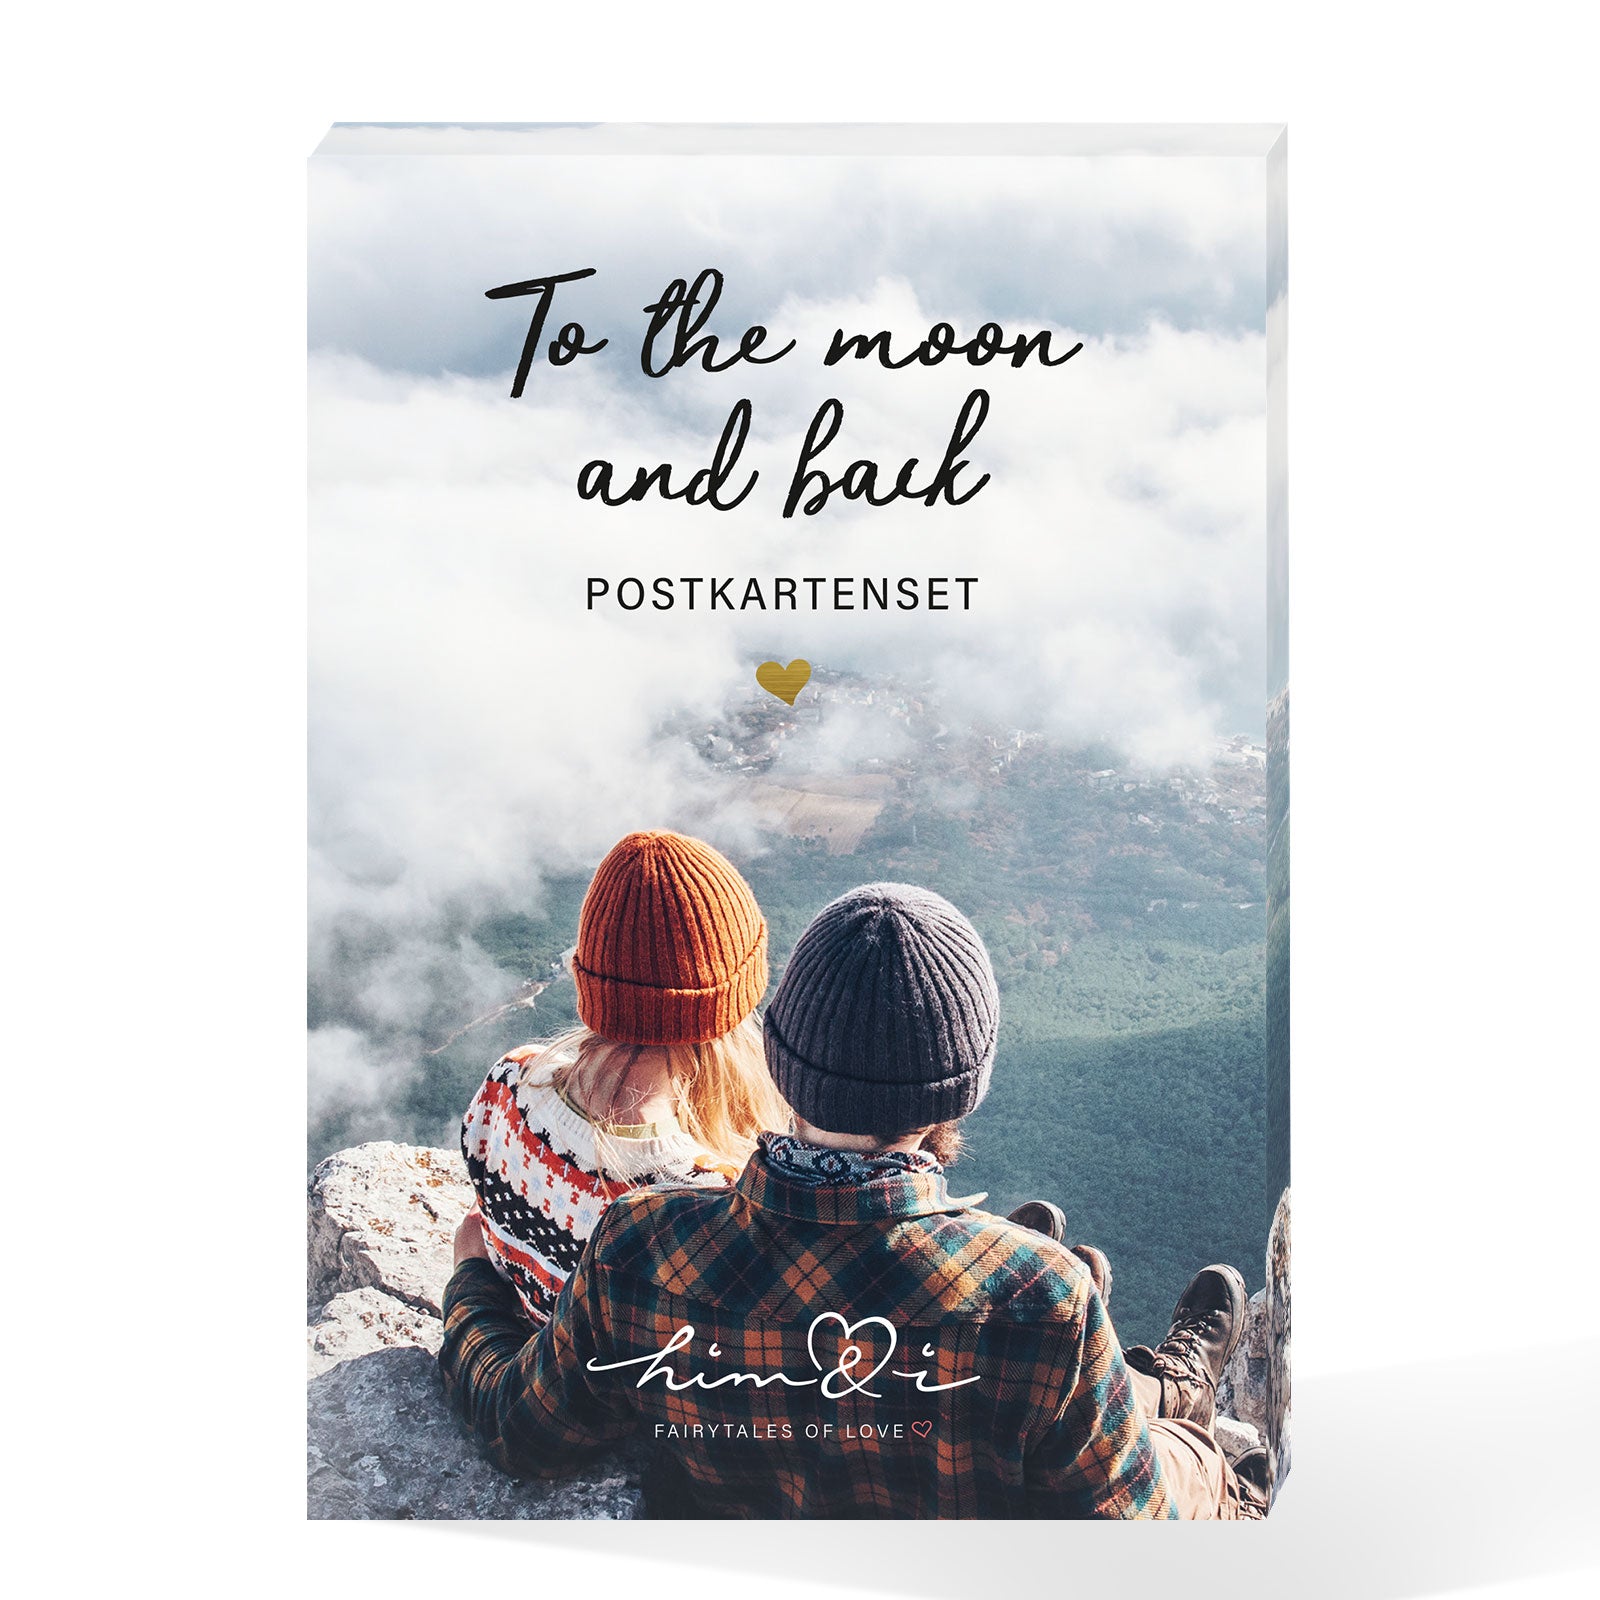 10er Postkarten Set "To the moon and back"